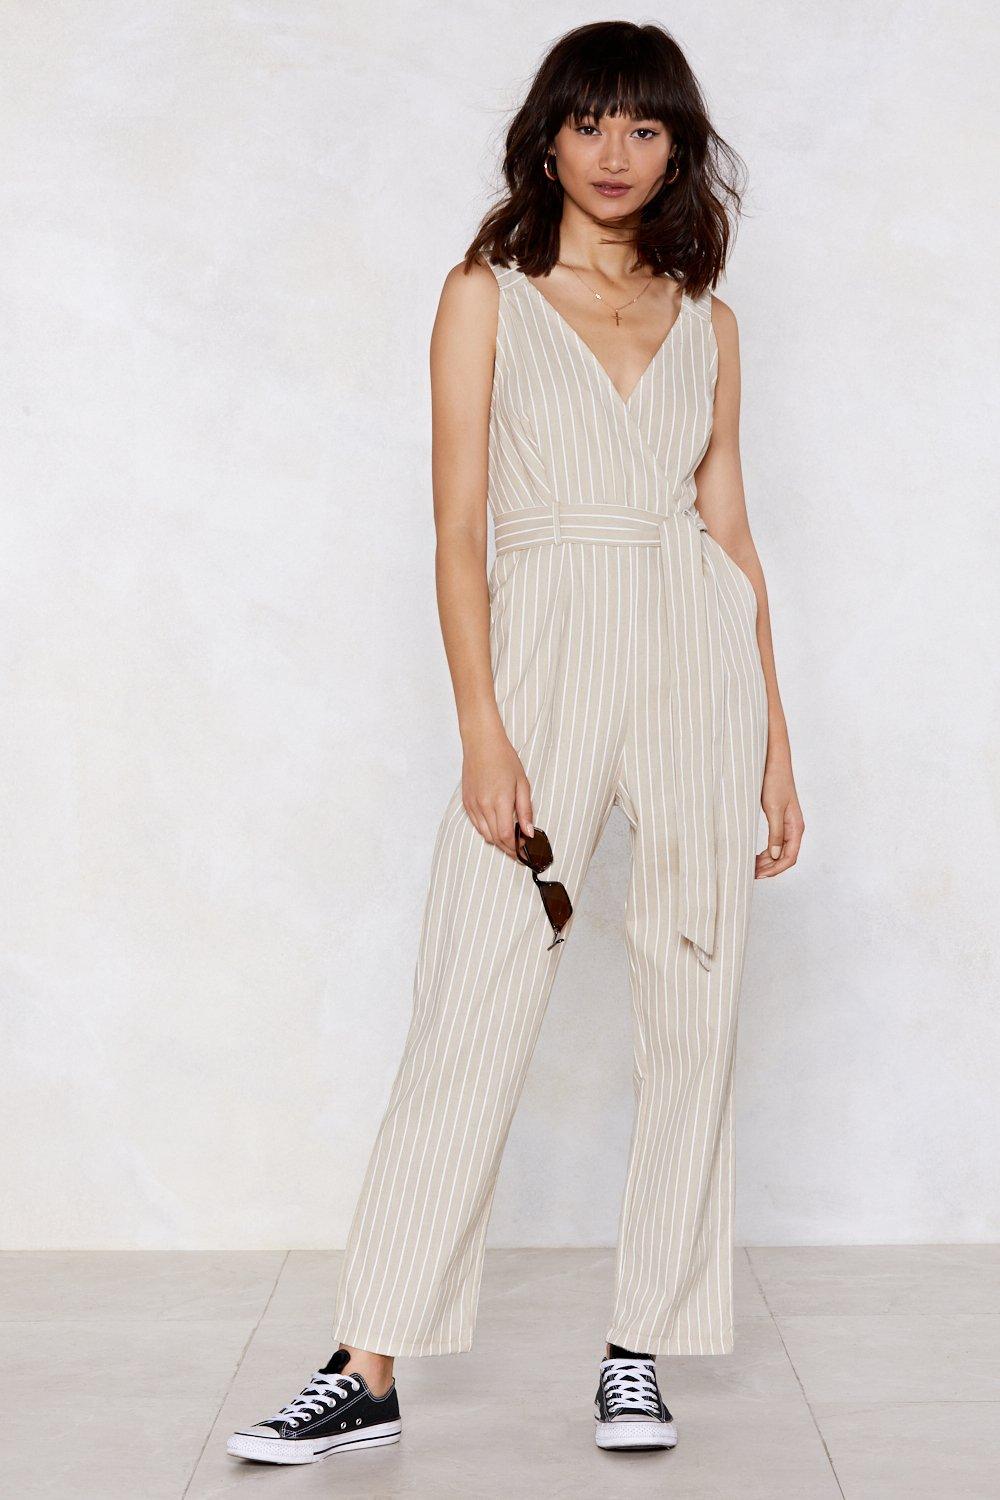 You Got It in One Striped Jumpsuit